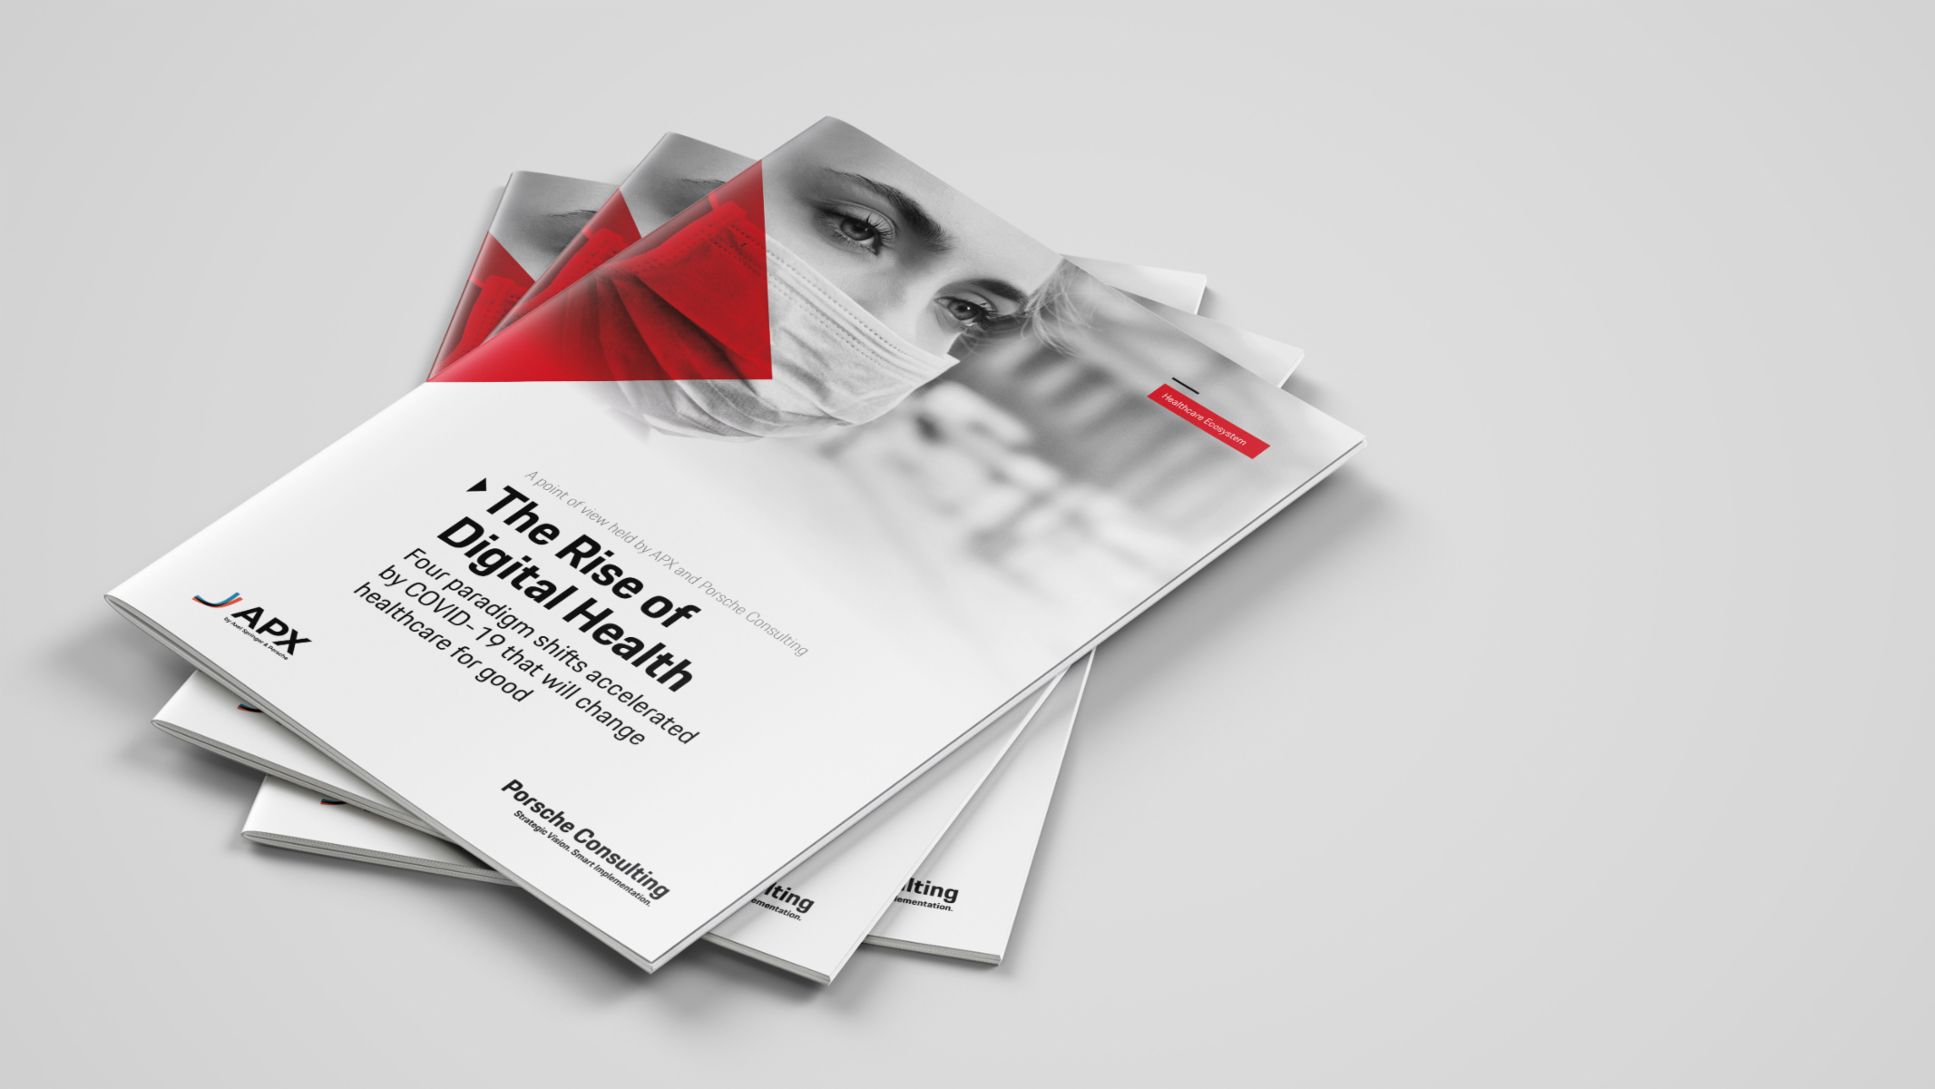 The Rise of Digital Health, white paper, 2020, Porsche Consulting GmbH